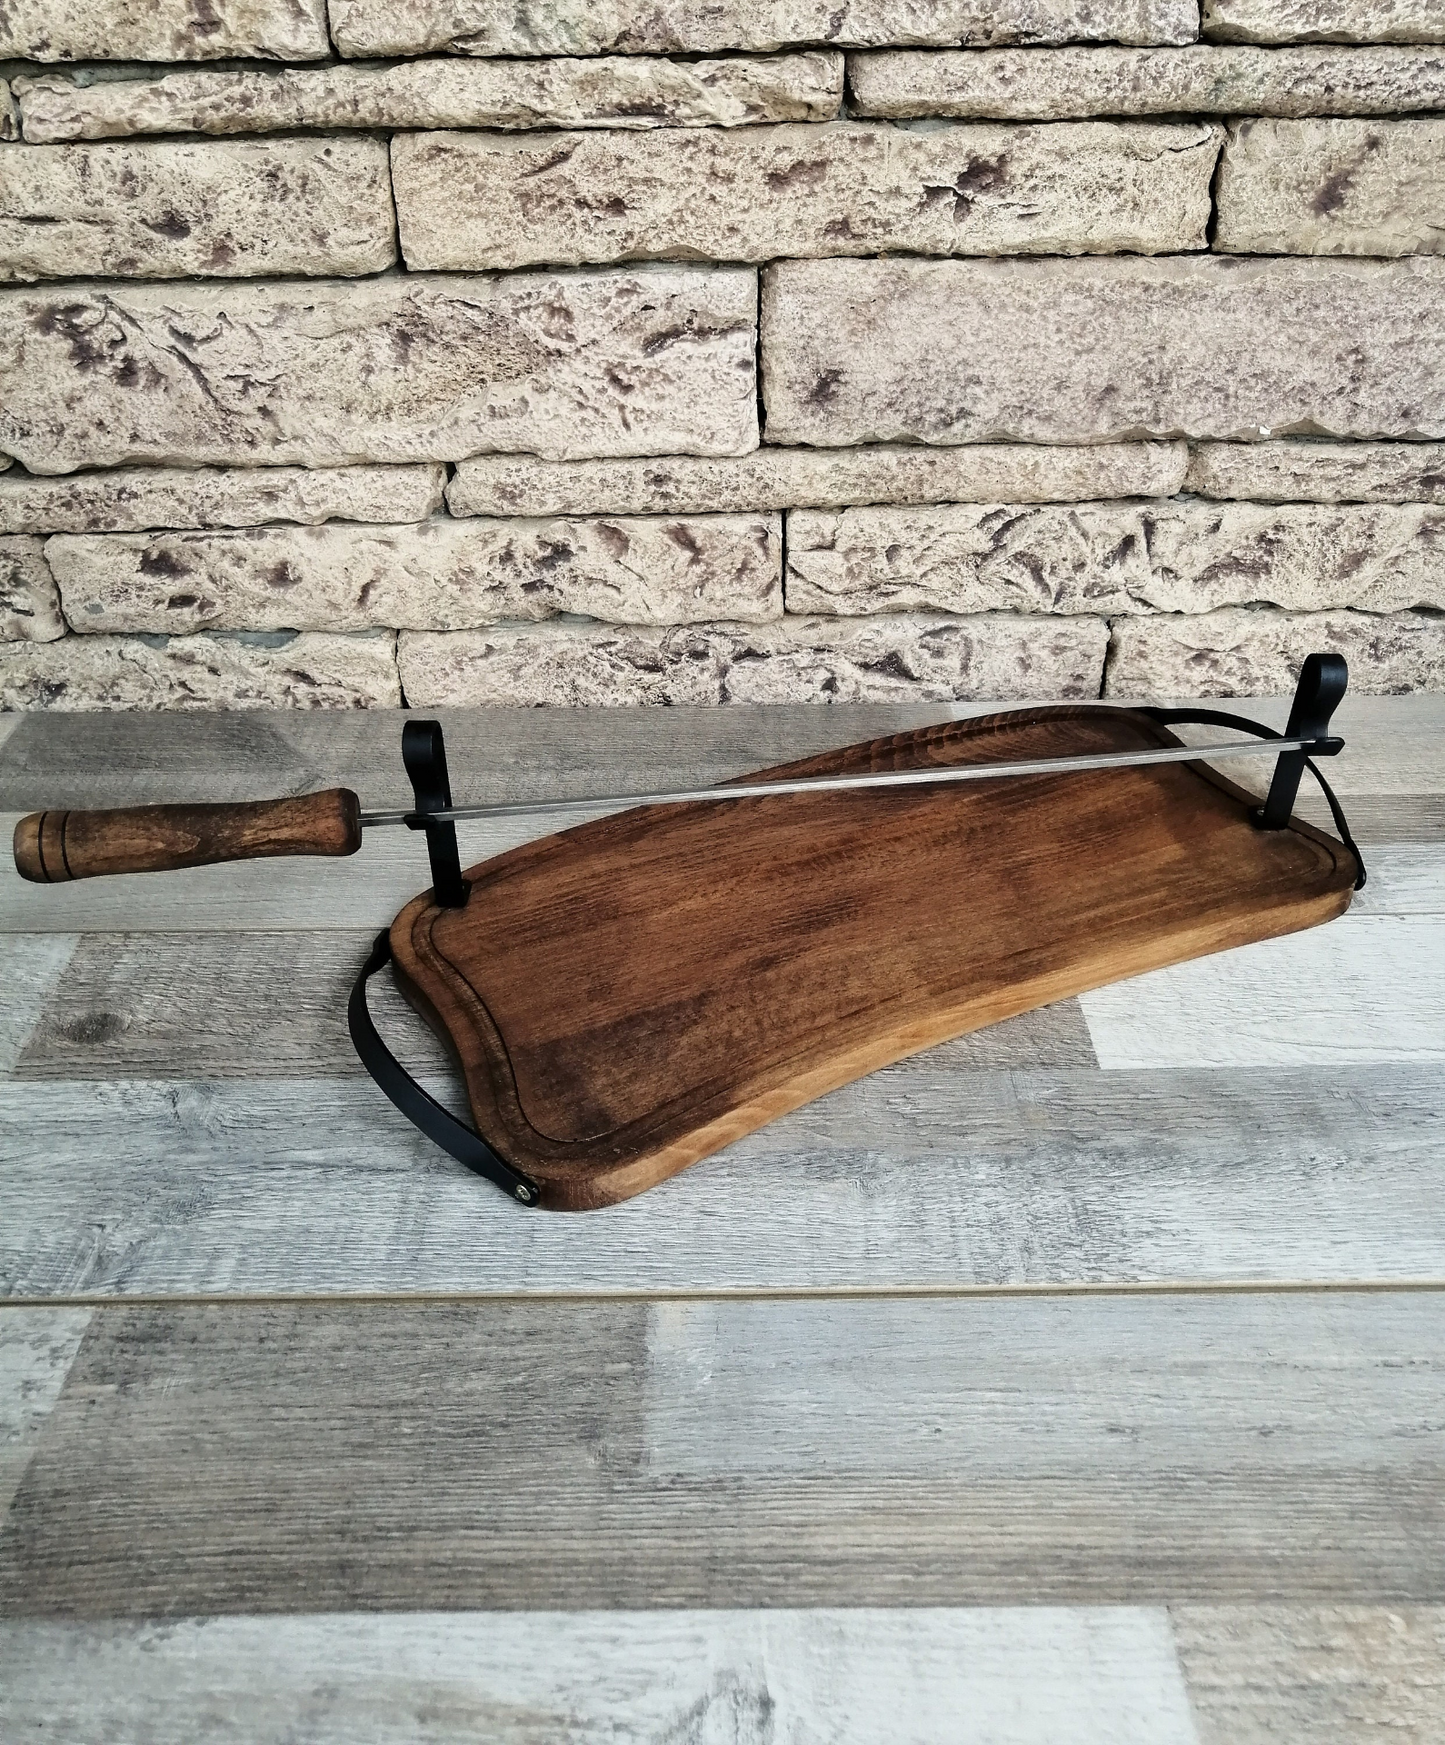 Wooden Tray with Handles for Barbecue, Iron Skewer with Wood Grip, Top Gift for Dad